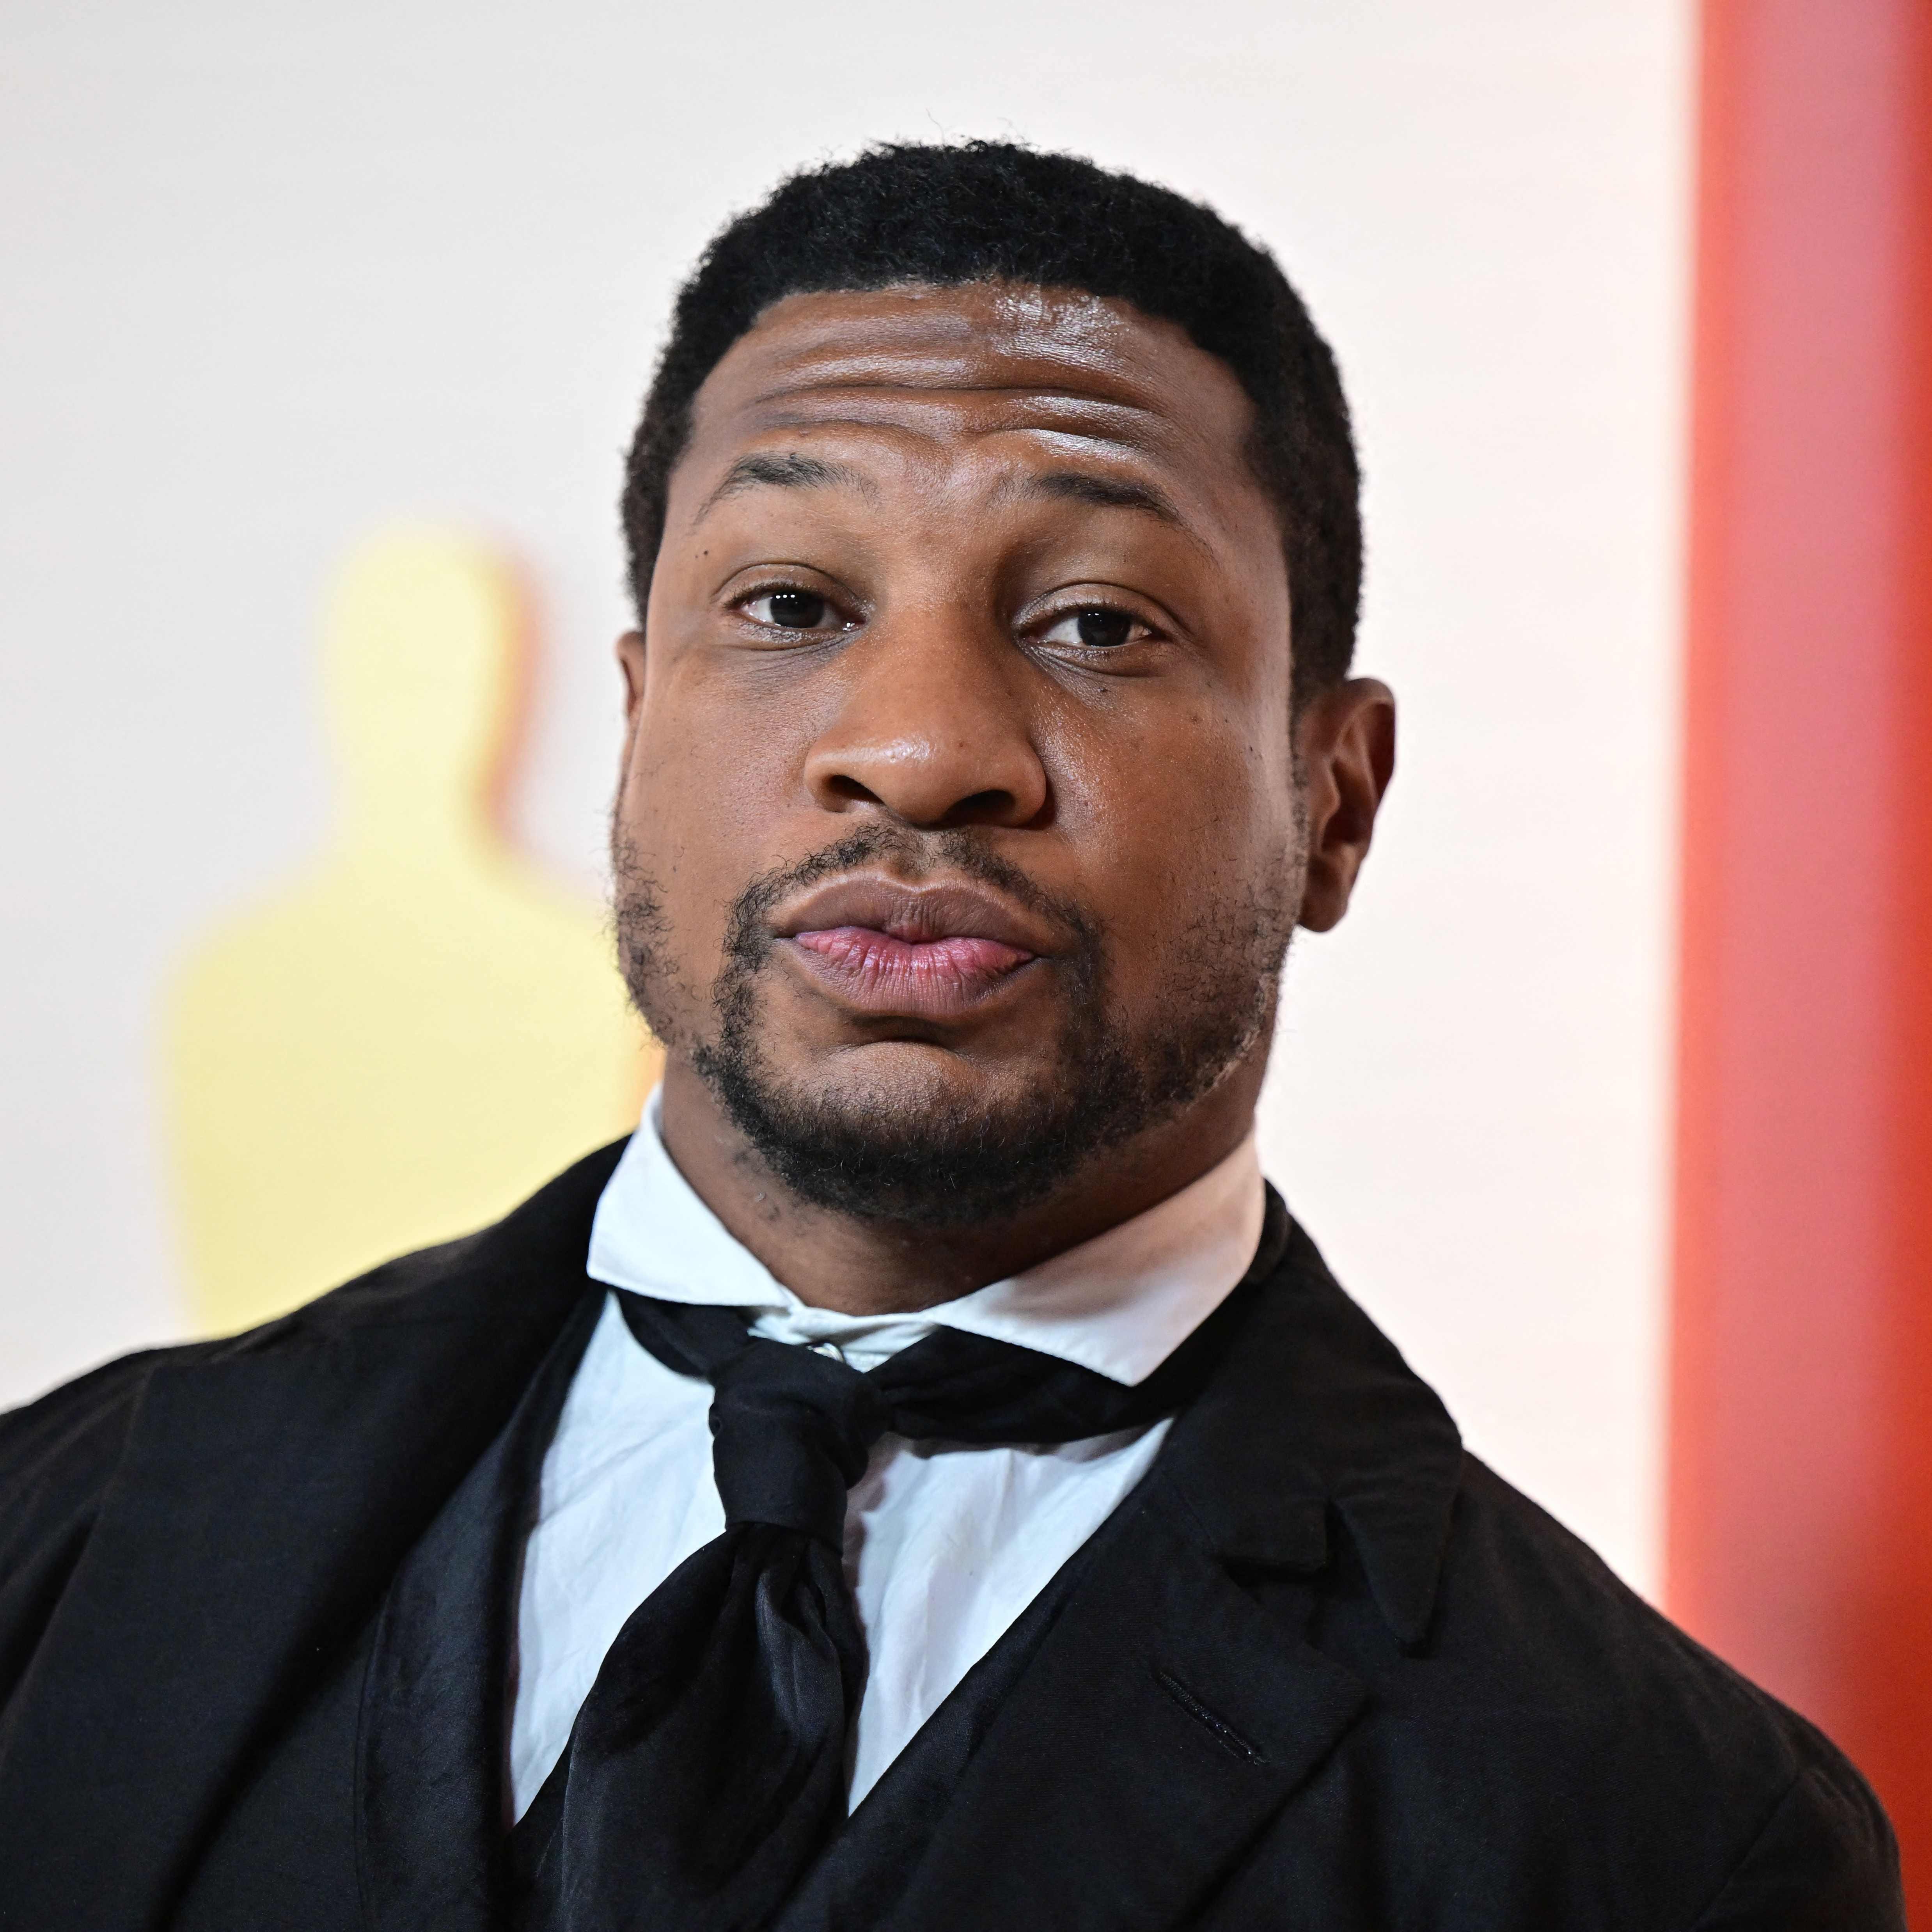 US actor Jonathan Majors attends the 95th Annual Academy Awards at the Dolby Theatre in Hollywood, California on March 12, 2023. (Photo by Frederic J. Brown / AFP) (Photo by FREDERIC J. BROWN/AFP via Getty Images) ORIG FILE ID: AFP_33B46MM.jpg